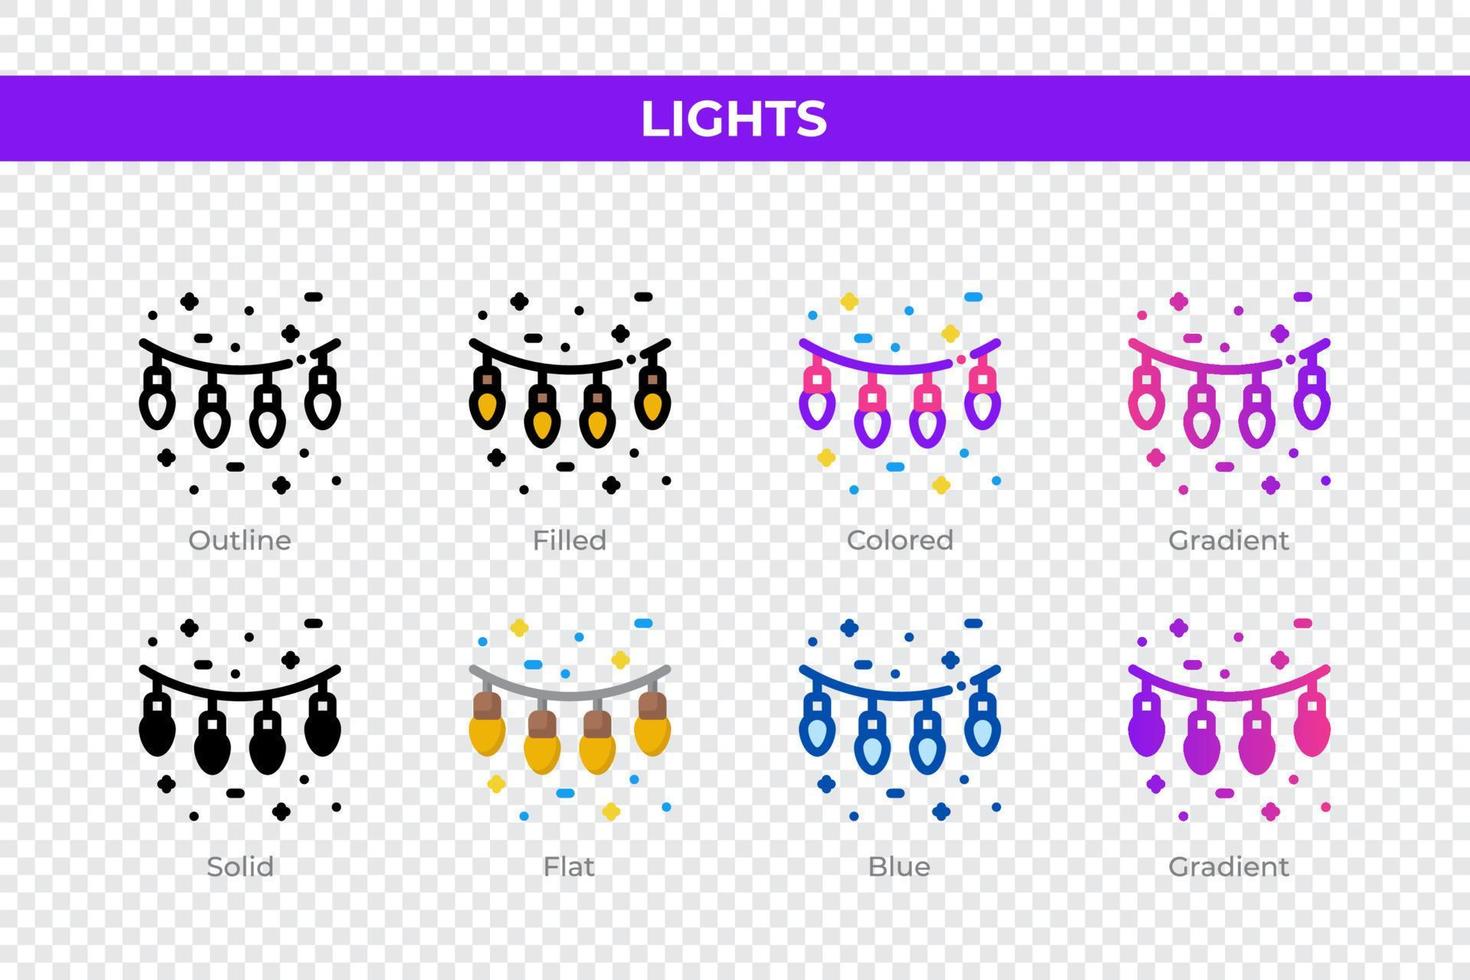 Lights icons in different style. Lights icons set. Holiday symbol. Different style icons set. Vector illustration